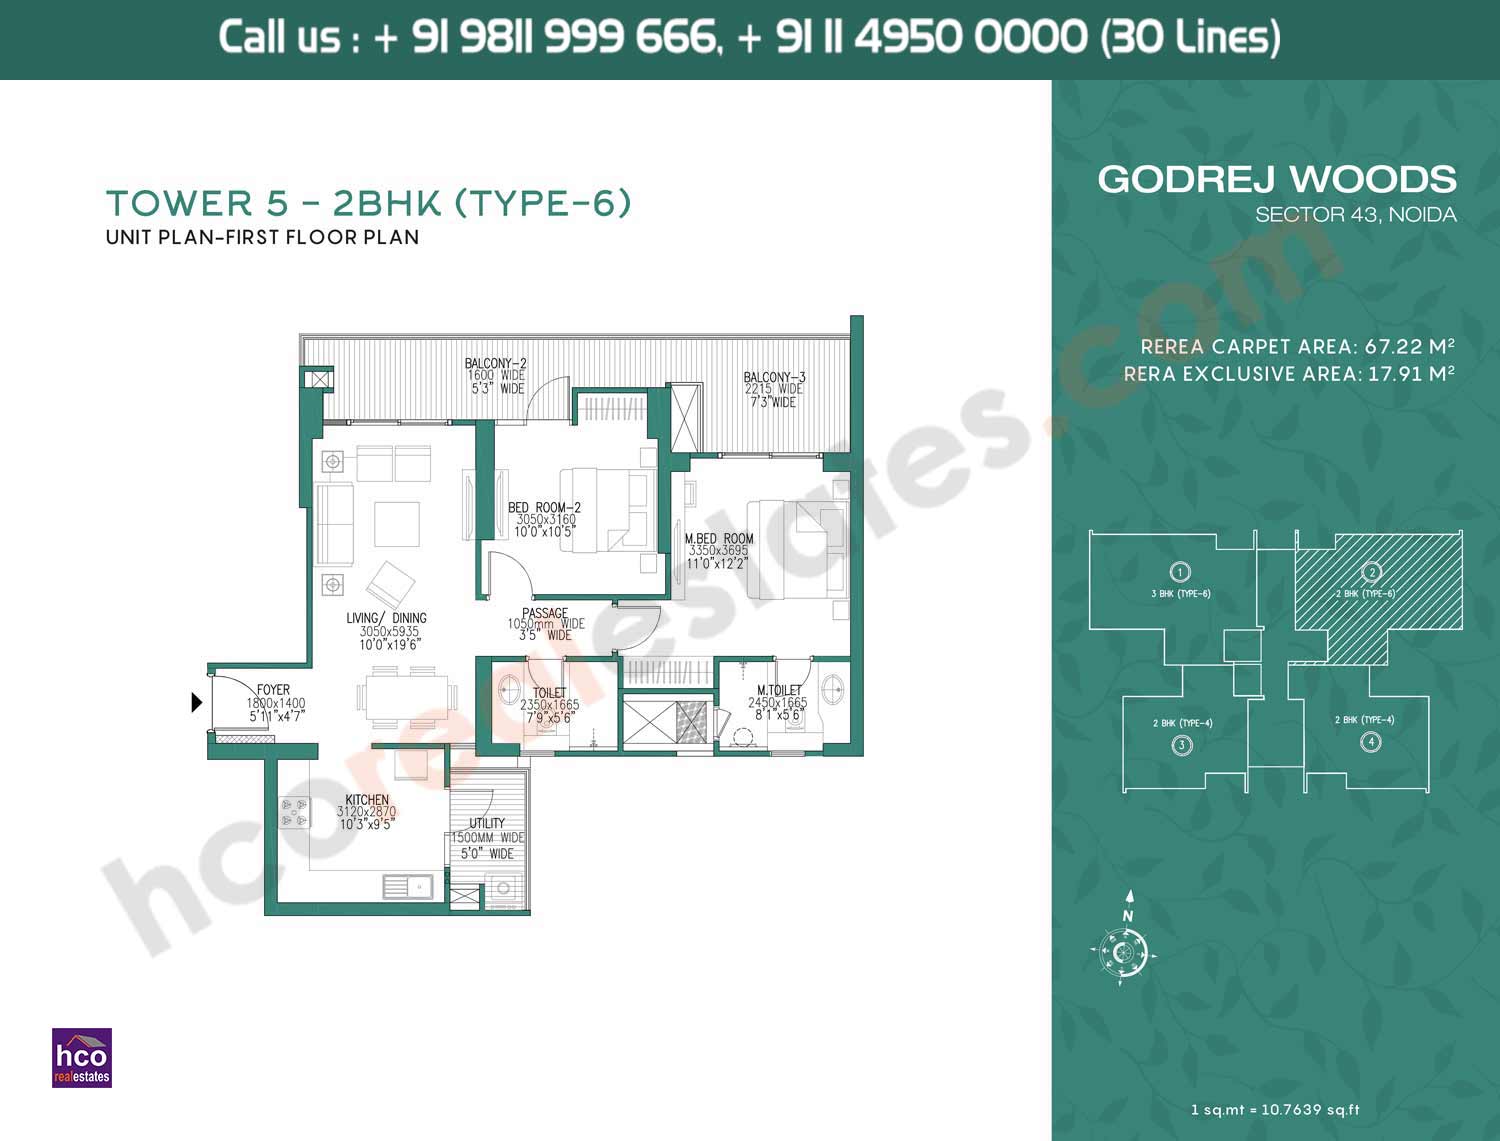 2 BHK, Type – 6, Tower – 5: 670 Sq. Ft.